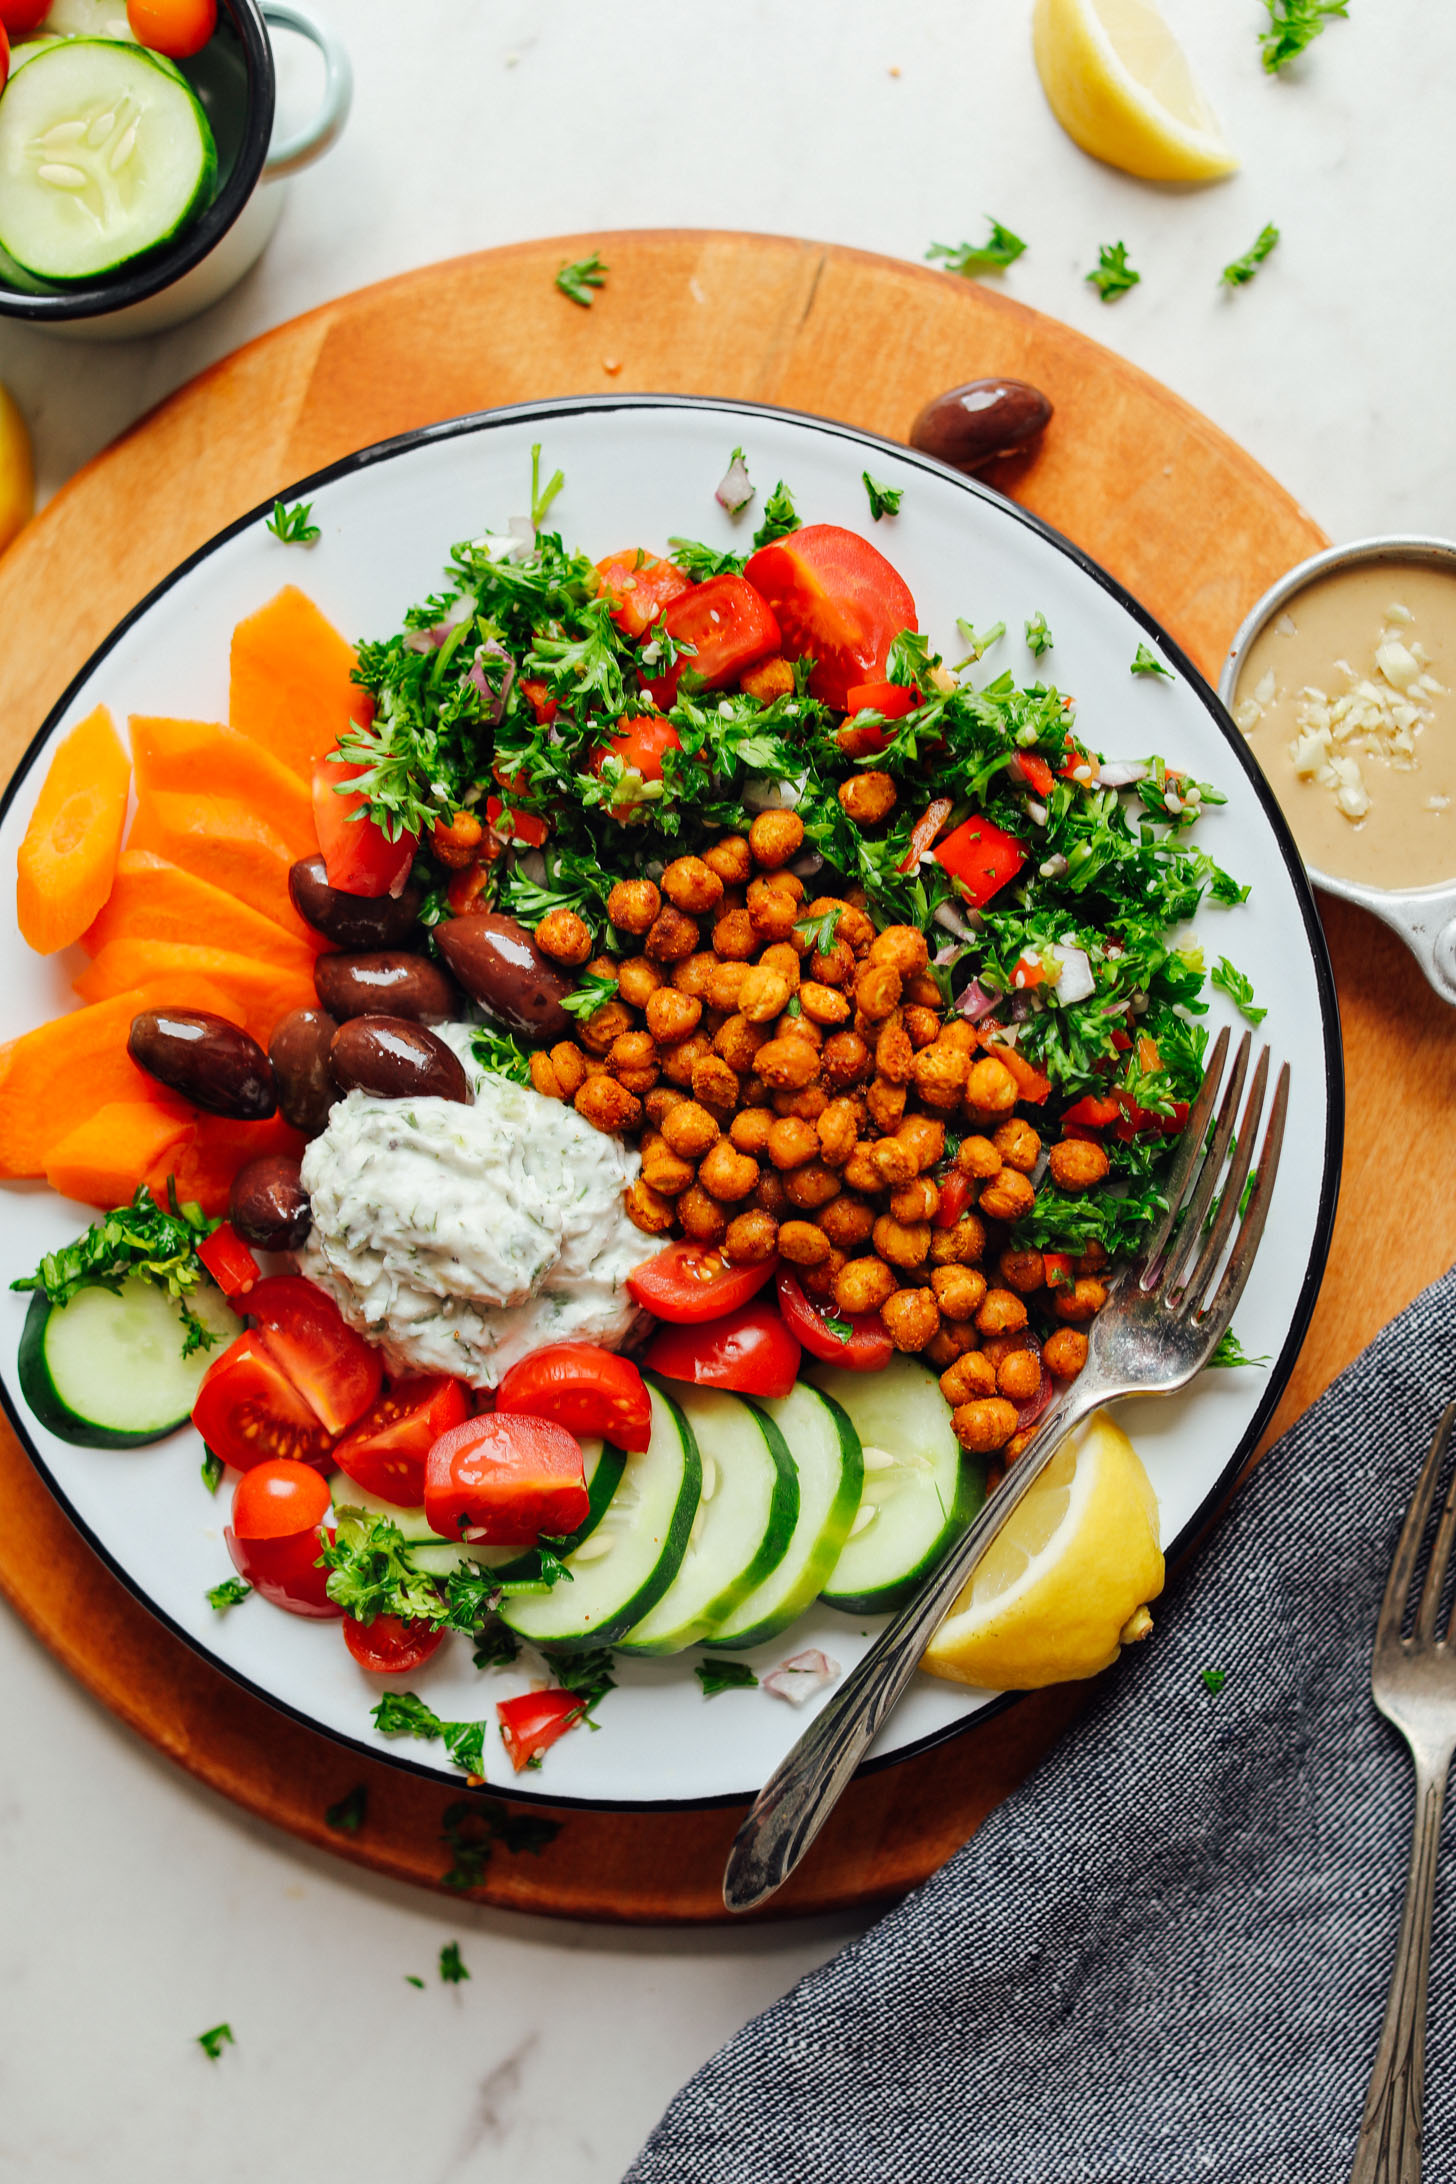 Cutting board topped with our Vegan Greek Bowl with Crispy Chickpeas, Vegan Tzatziki, and Veggies